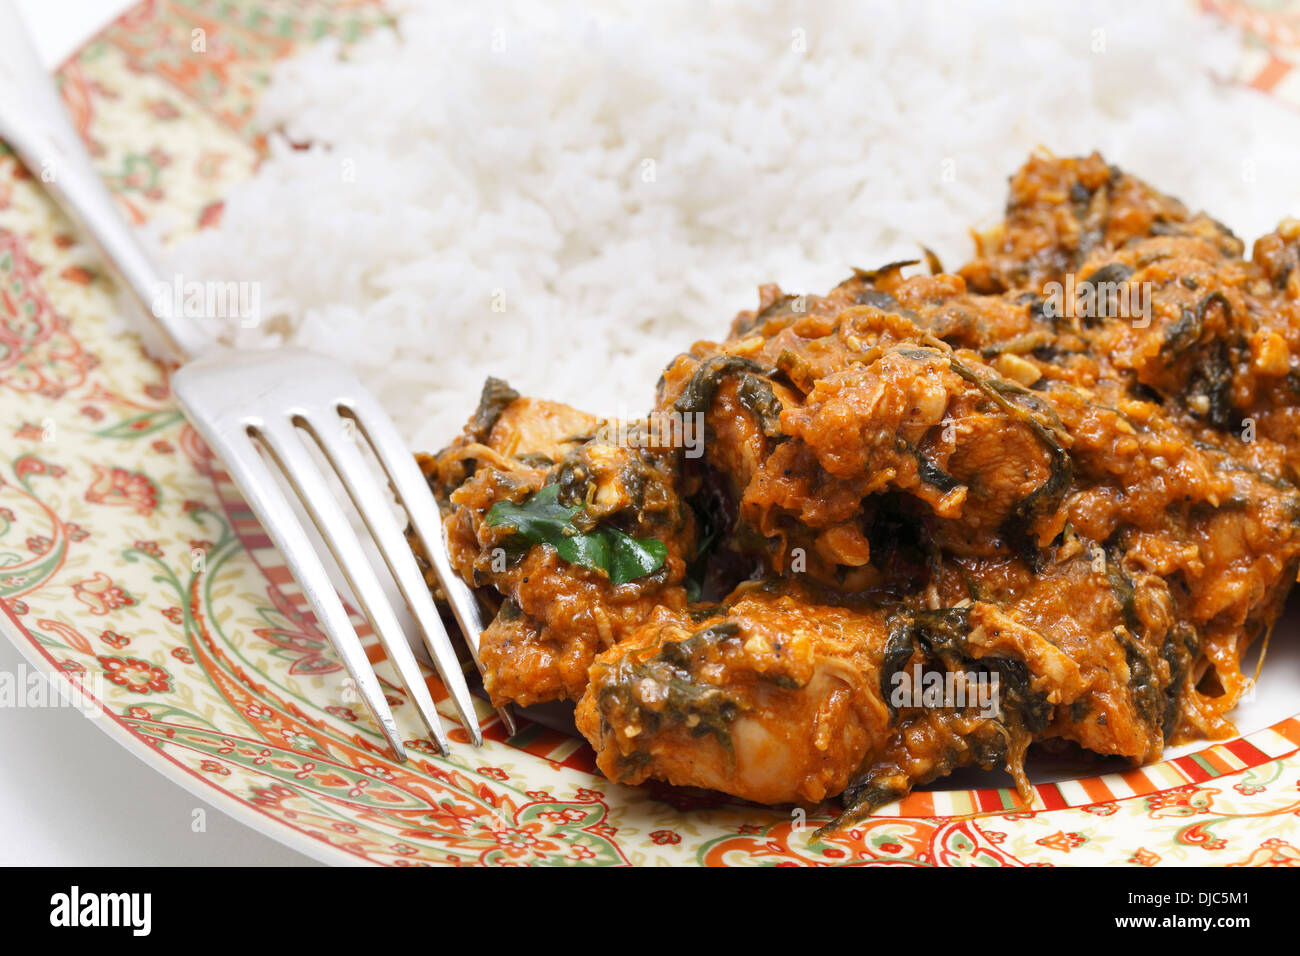 Methi murgh - chicken cooked with fresh fenugreek leaves on a plate with basmati rice and a fork Stock Photo